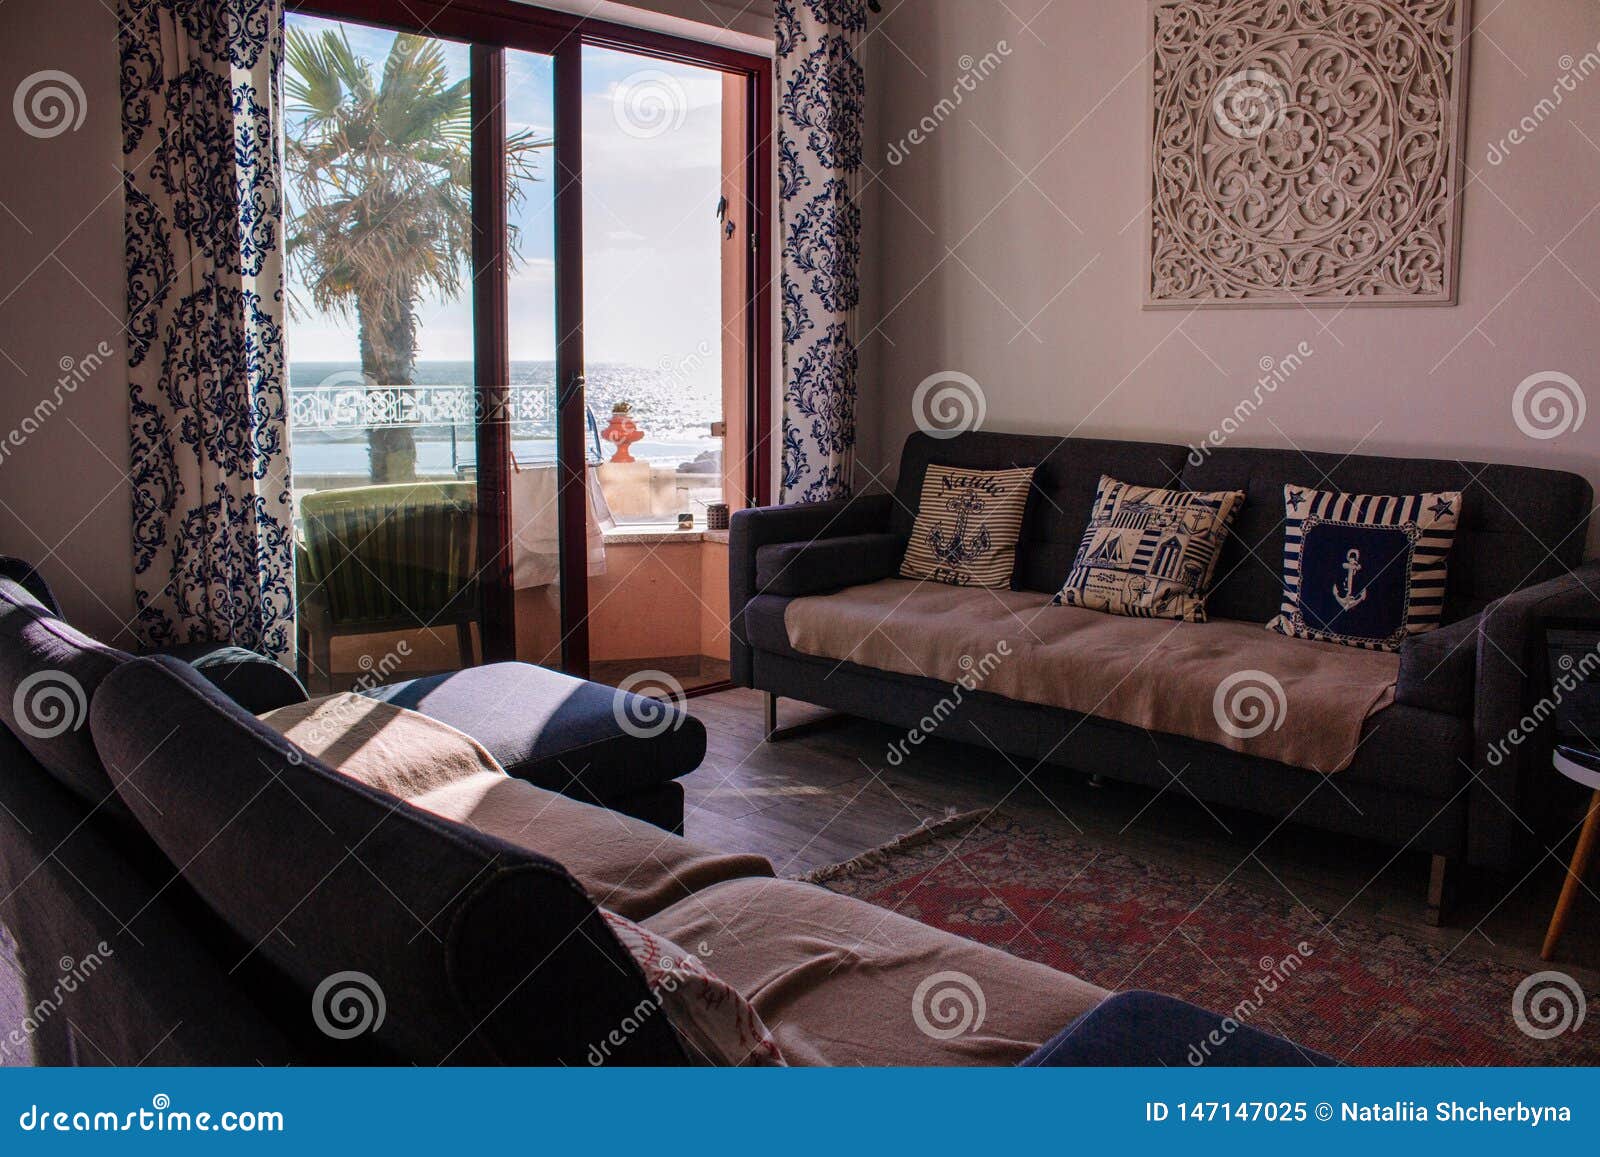 Comfortable Room With Sofa And Balcony With Sea View Cozy Interior Of Apartment Living Room With Stylish Decor And Furniture Stock Image Image Of Cozy